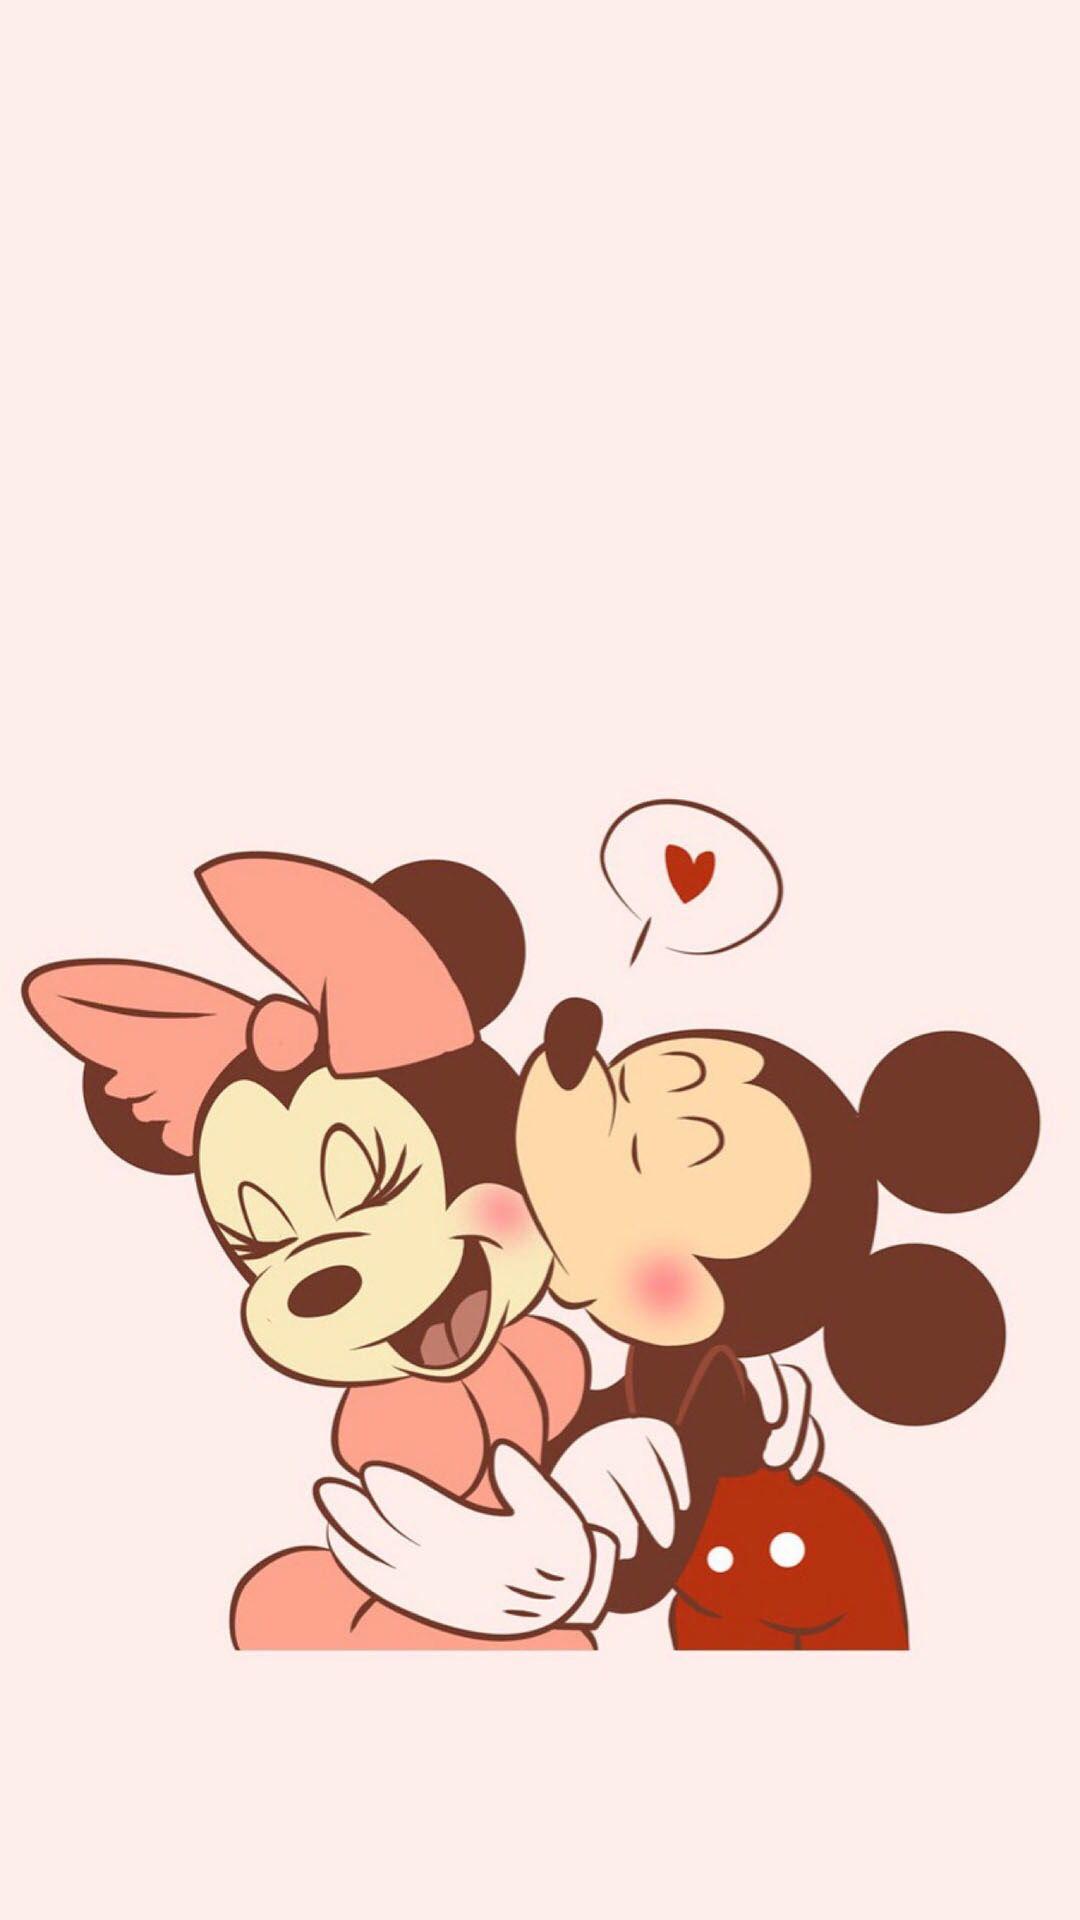 Mickey And Minnie Mouse Love Couple Cartoon Red Wallpaper With Hearts Hd  Wallpaper For Desktop Mobile And Tablet 3840x2400  Wallpapers13com